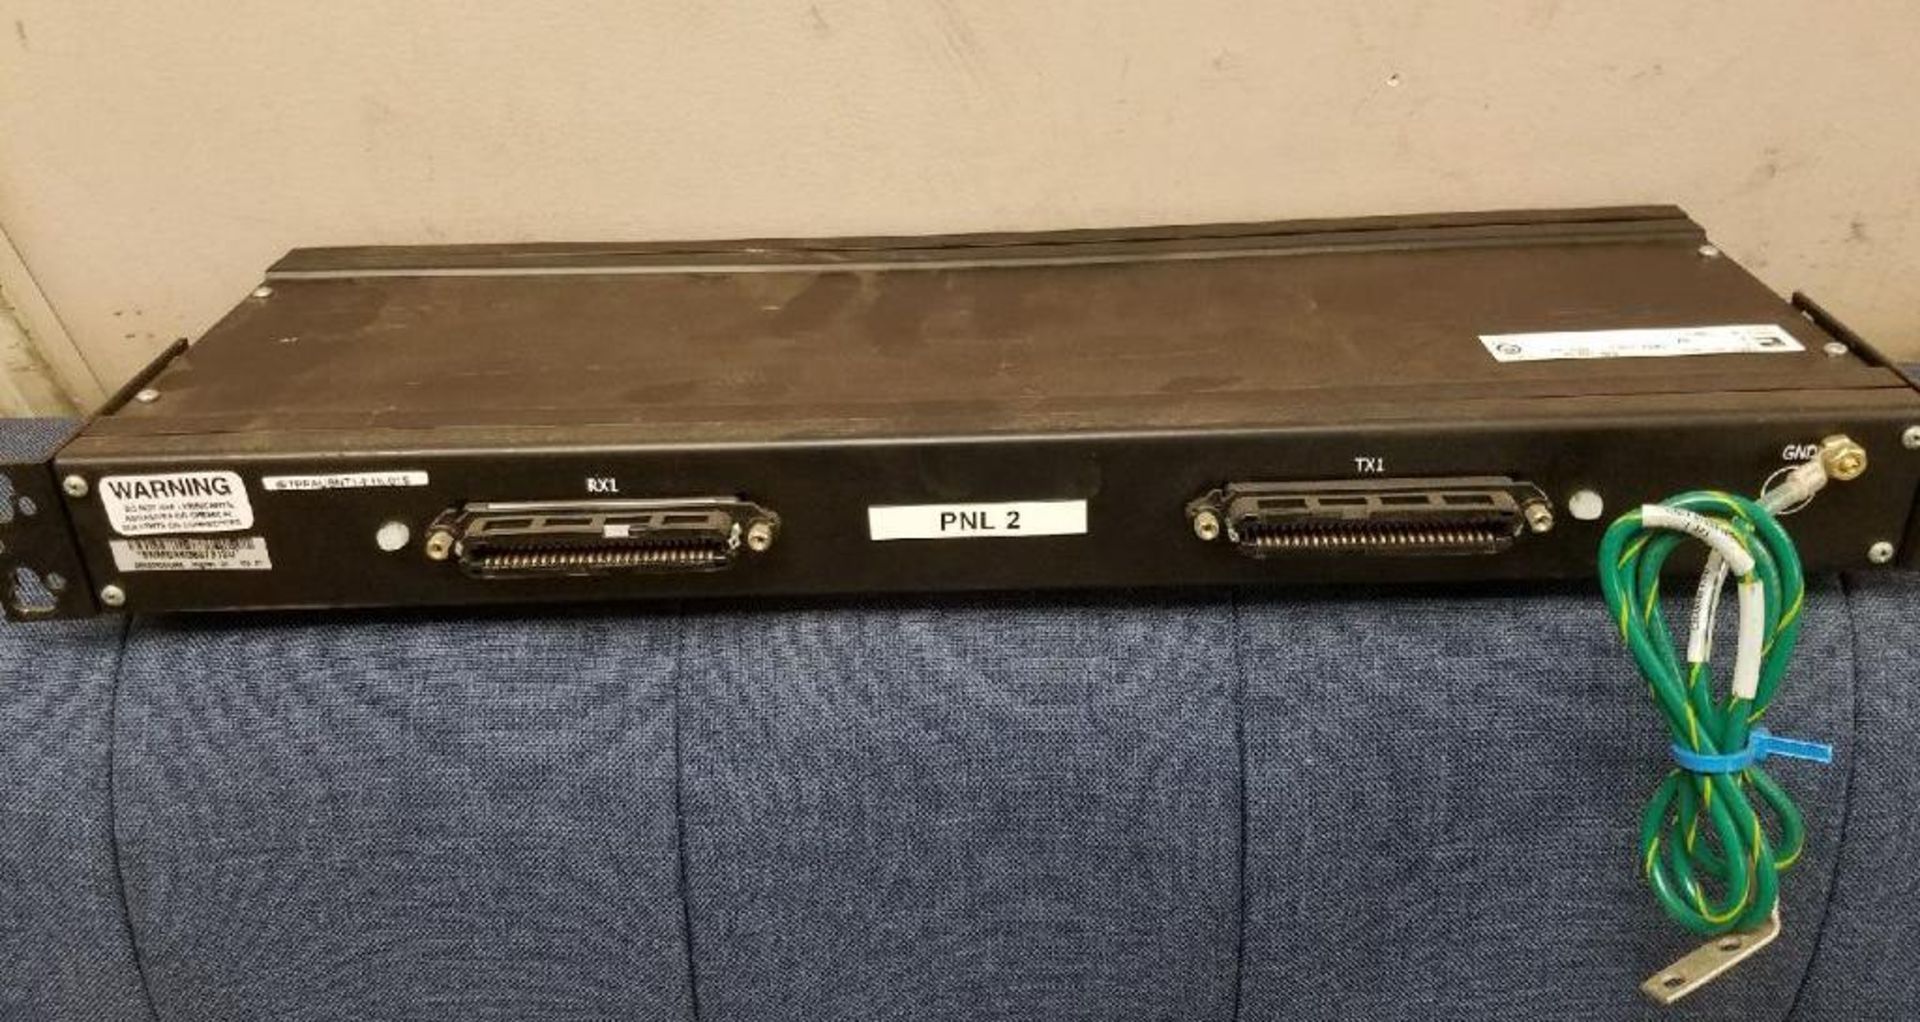 3 X COMPUTER NETWORKING GEAR SWITCHES - Image 2 of 3